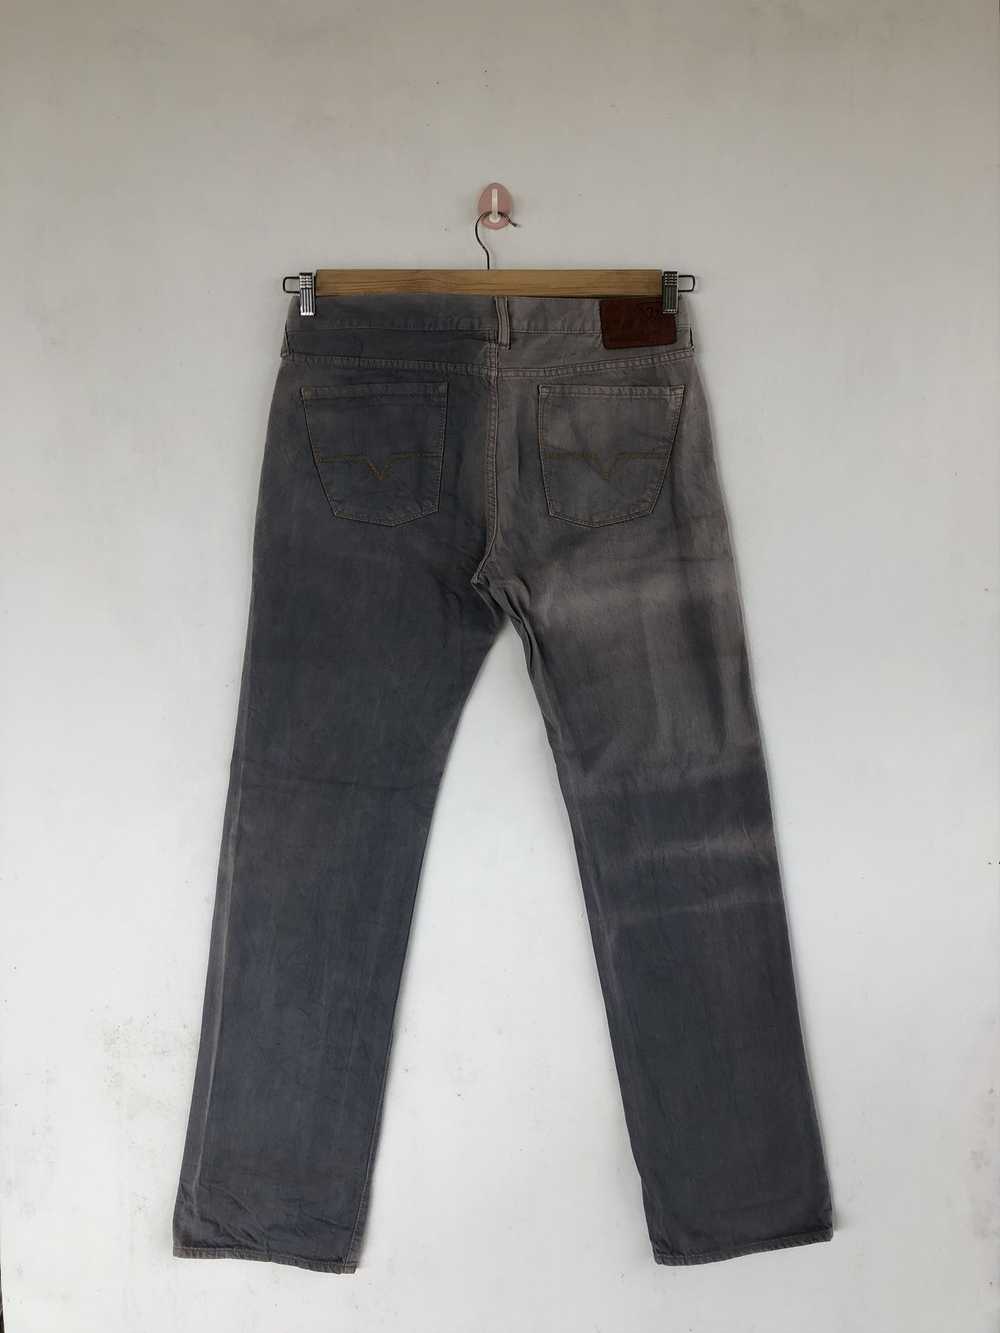 Japanese Brand × Streetwear Vintage Guess Jeans S… - image 2